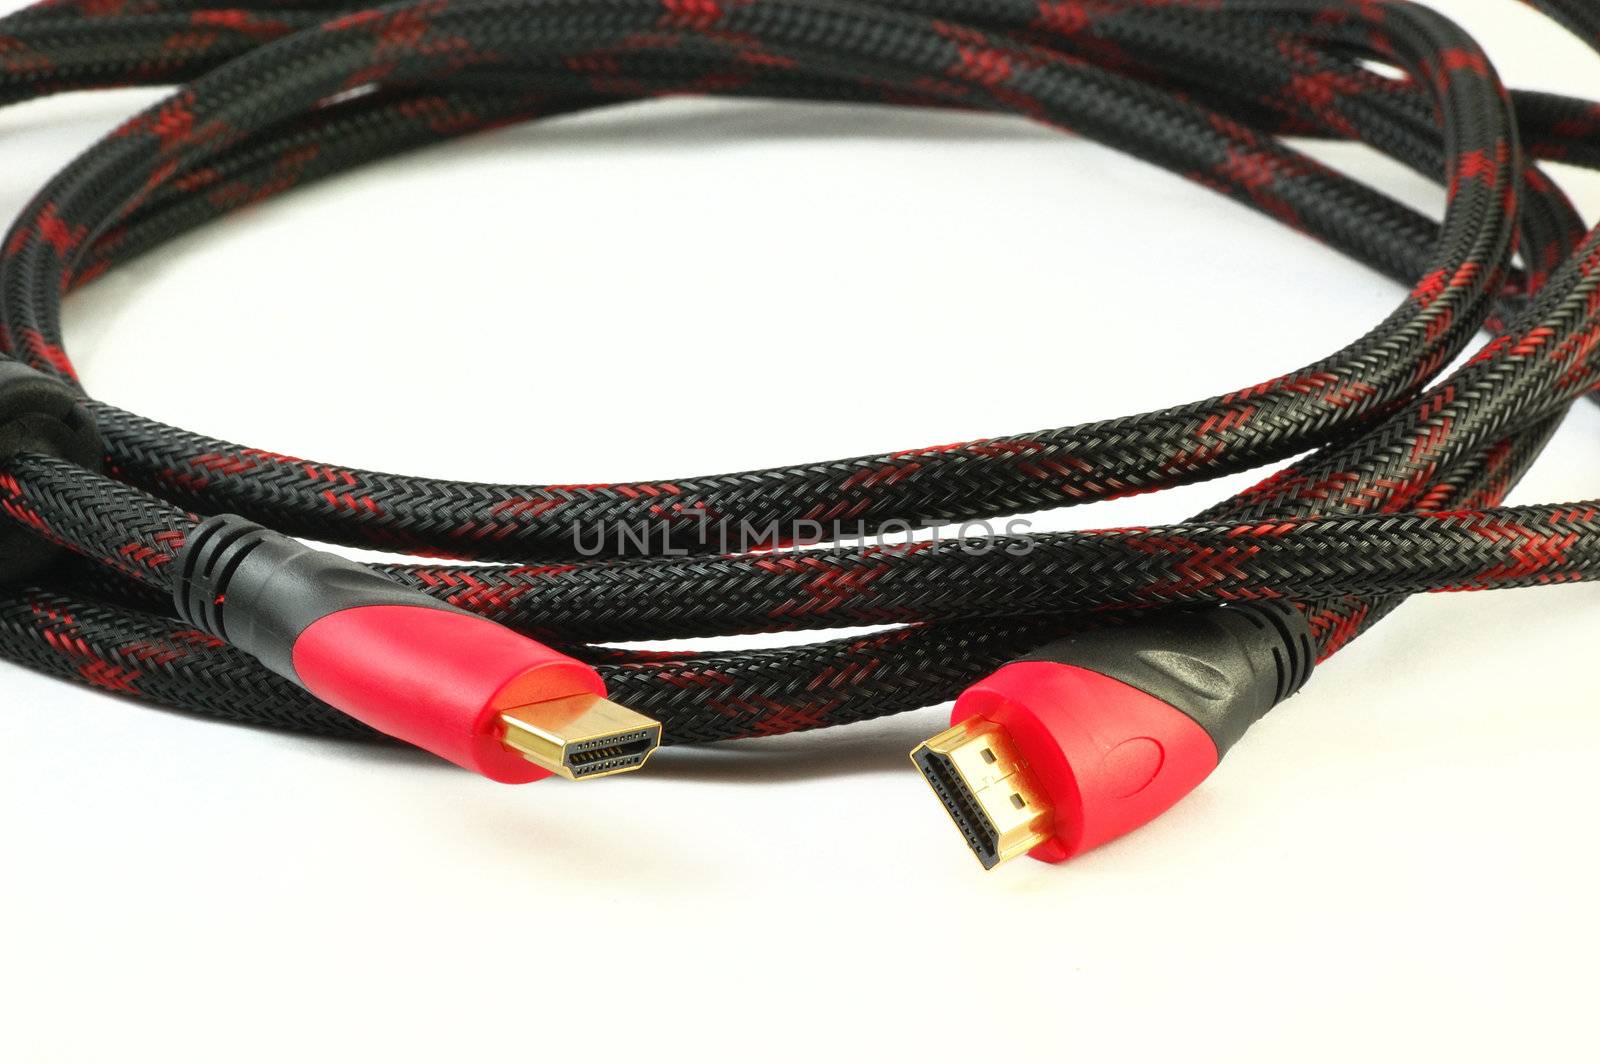 HDMI Cable and connectors by nihues